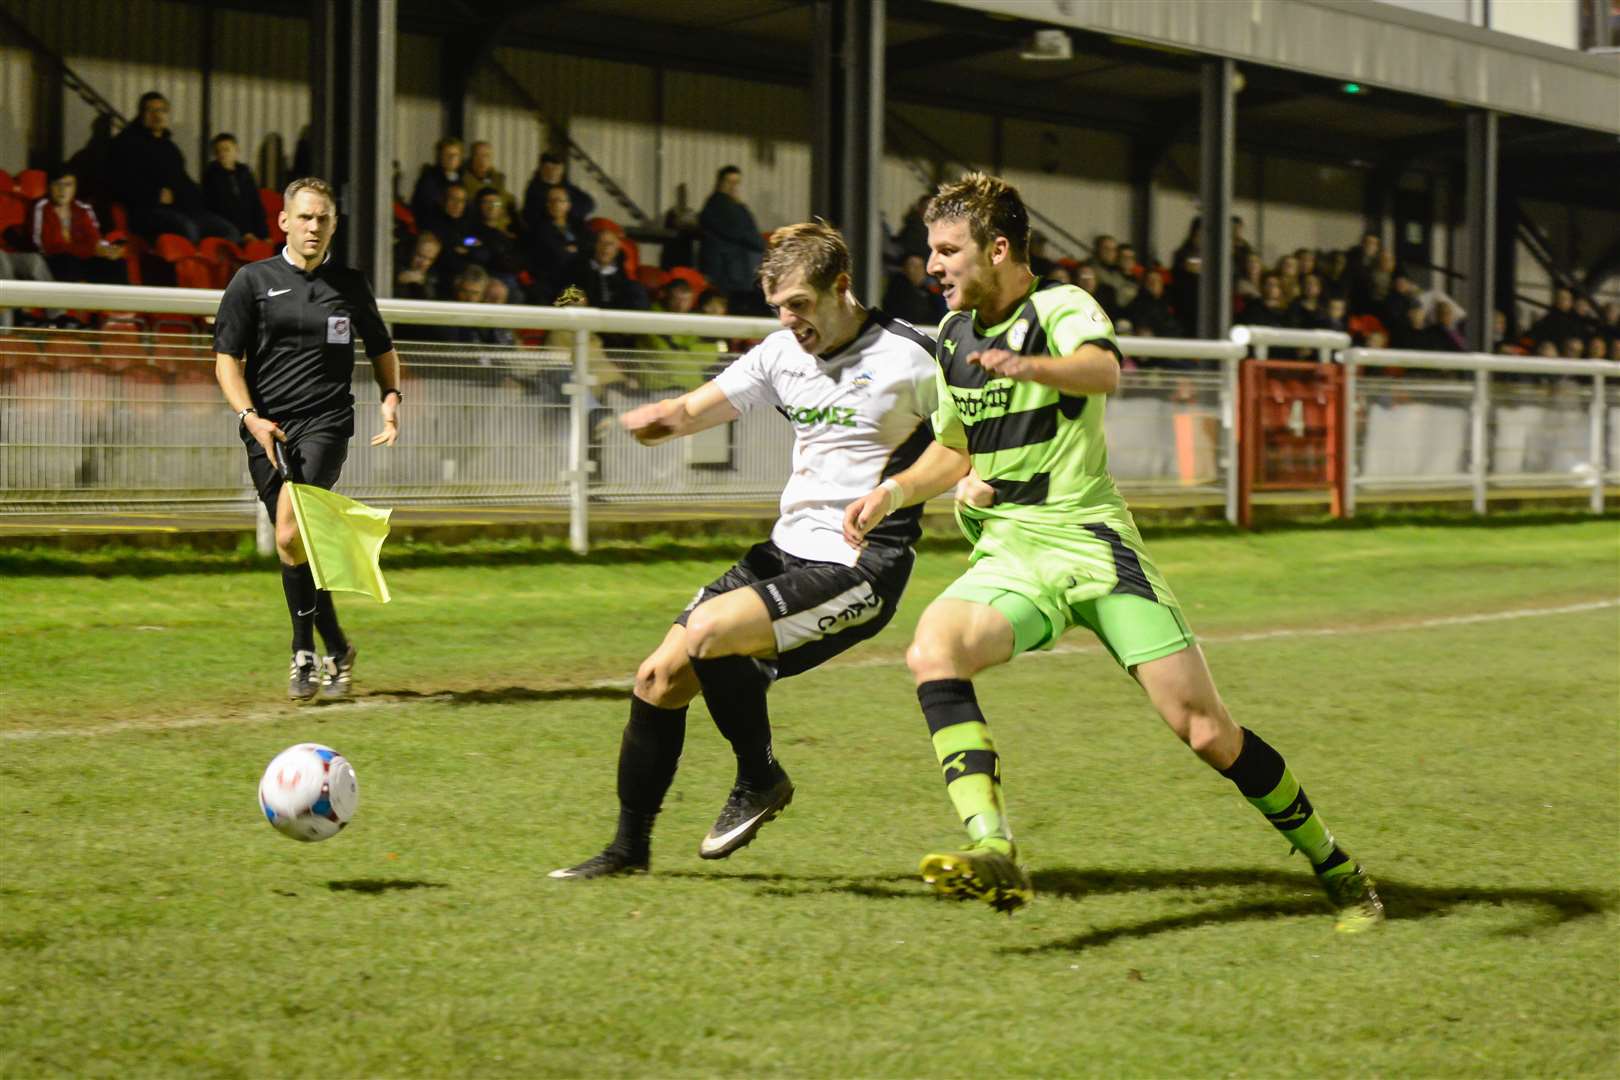 Dover on the attack against Forest Green win a corner kick